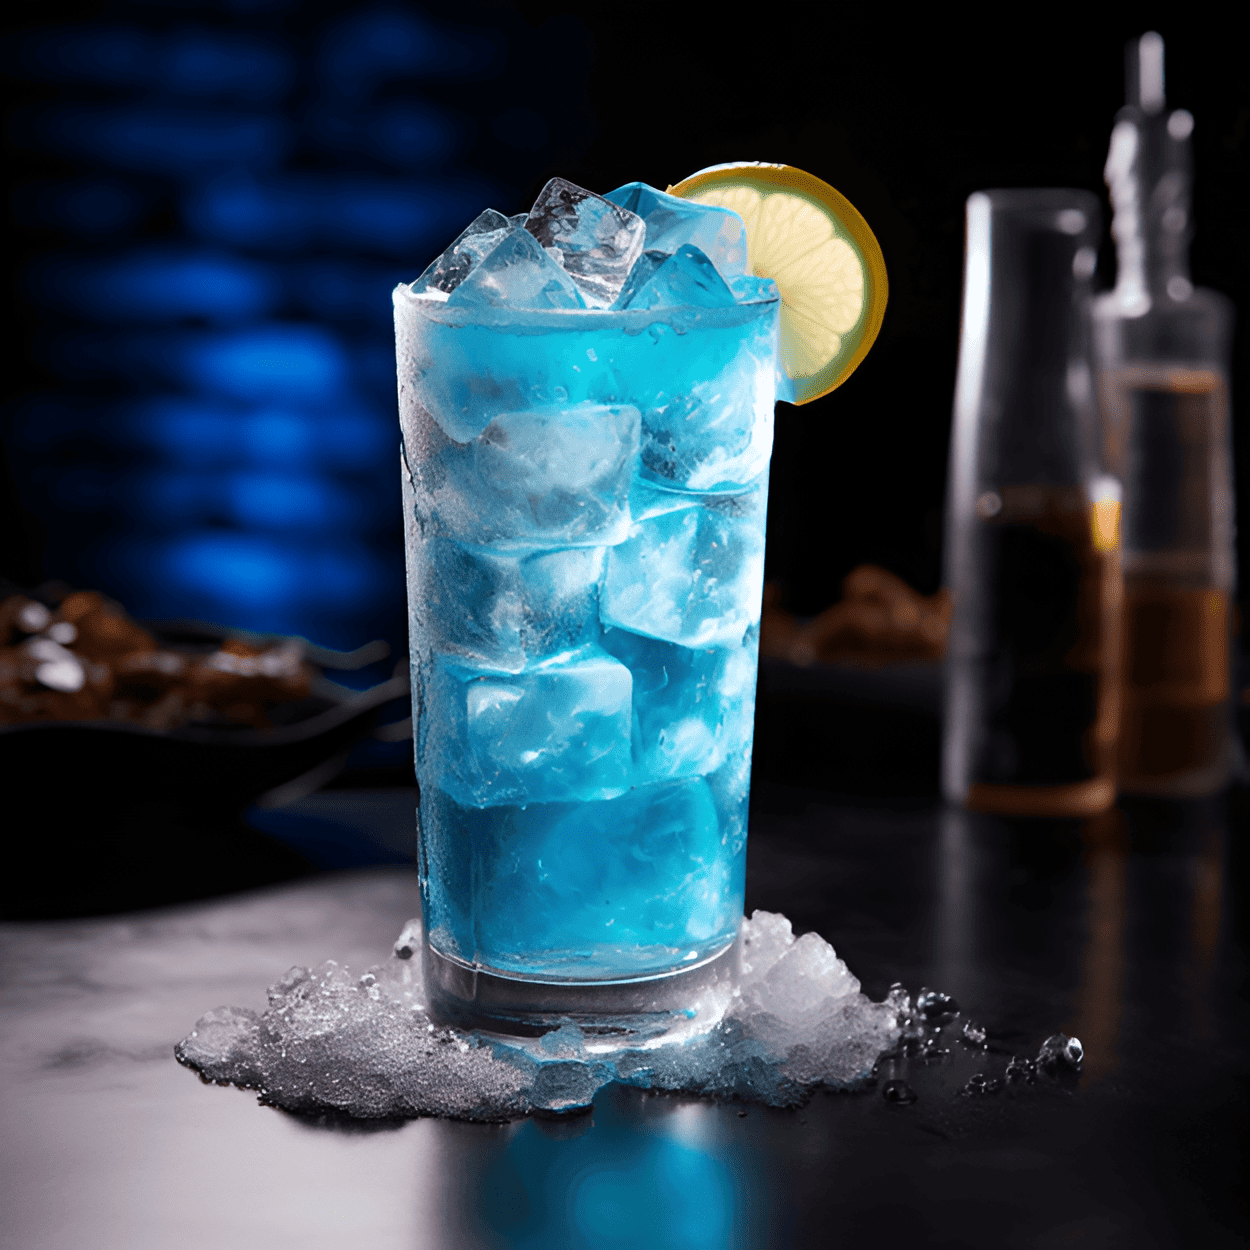 Frost Bite Cocktail Recipe - The Frost Bite is a refreshing cocktail with a sweet and sour balance. The fruity flavors of blue curacao and pineapple juice blend perfectly with the sourness of lime juice. The hint of peppermint schnapps gives it a cool, minty finish.